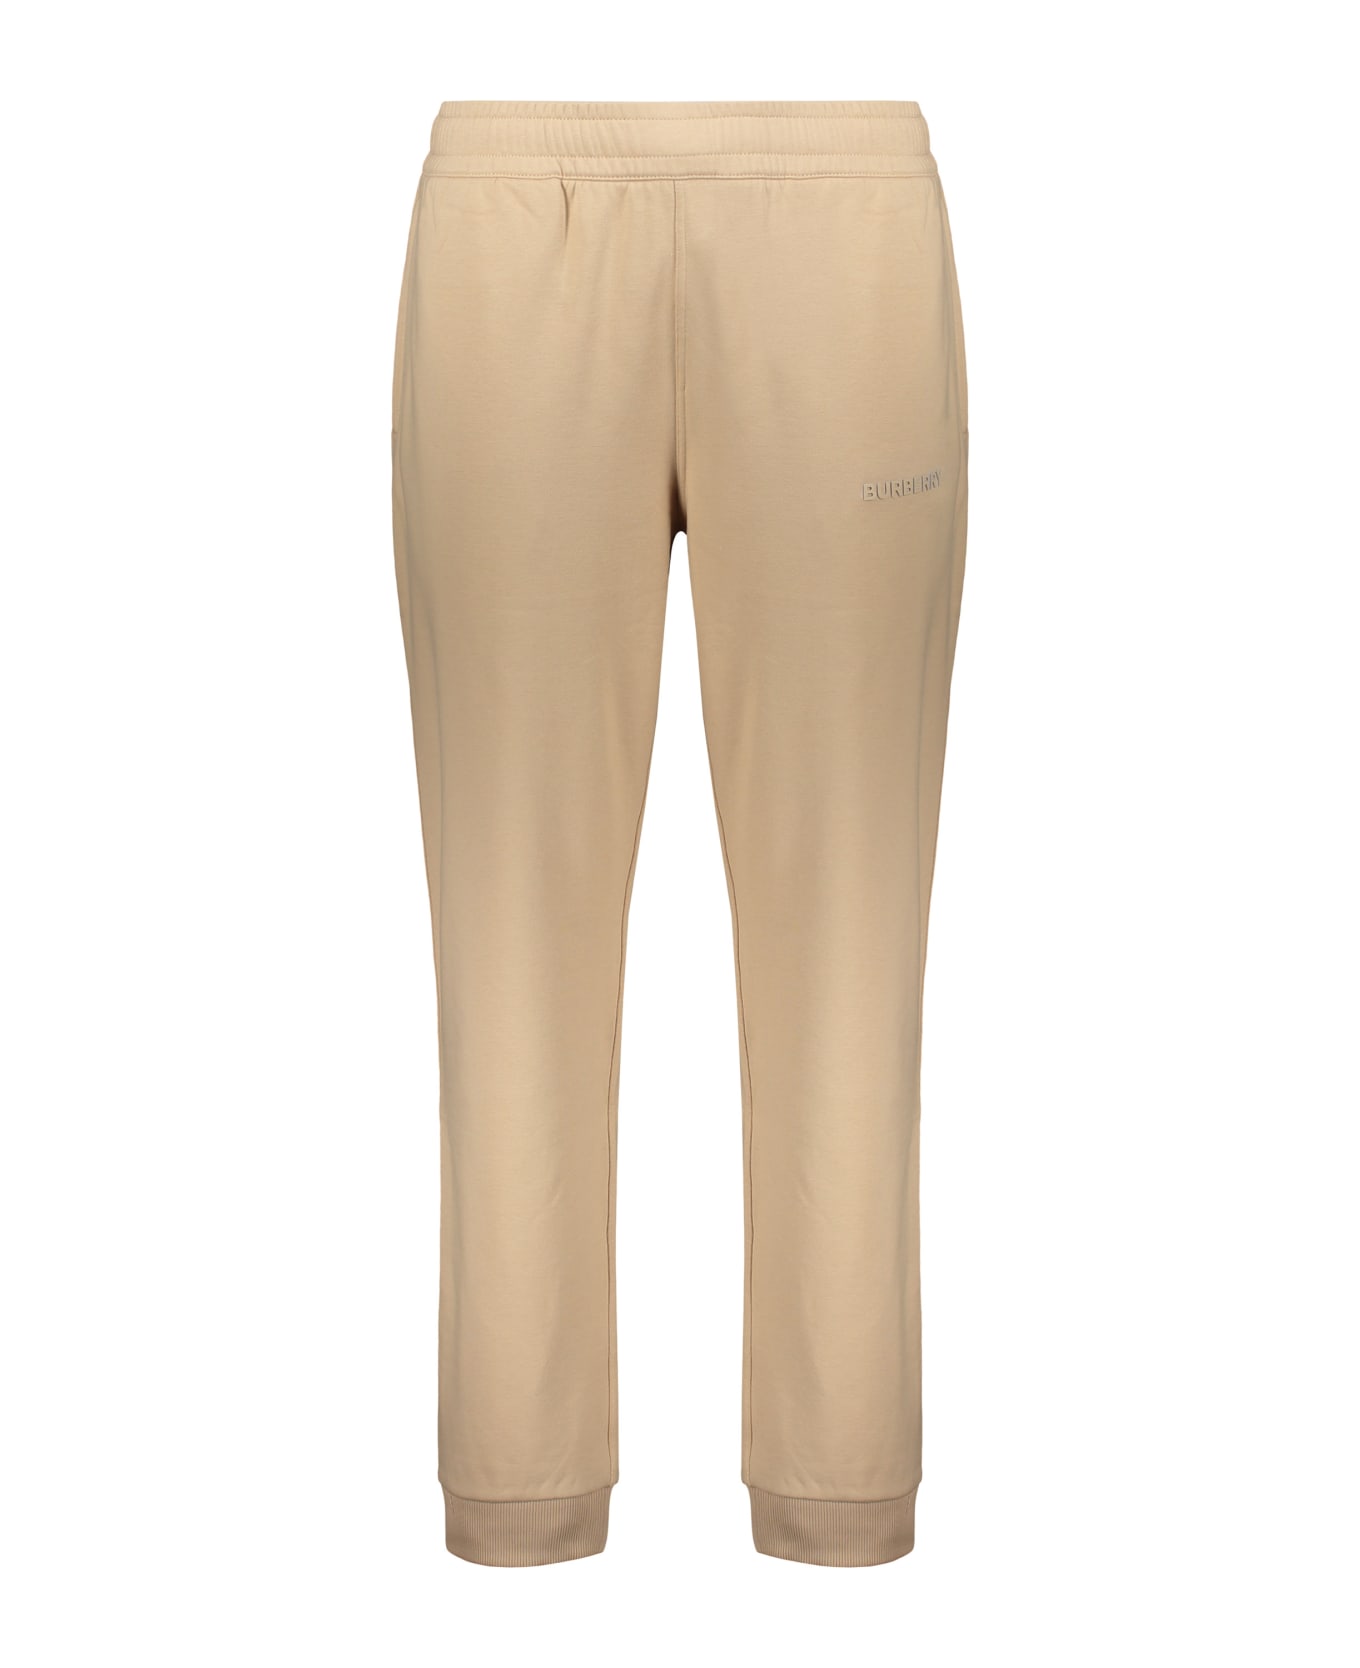 Burberry Cotton Track-pants - Beige ボトムス